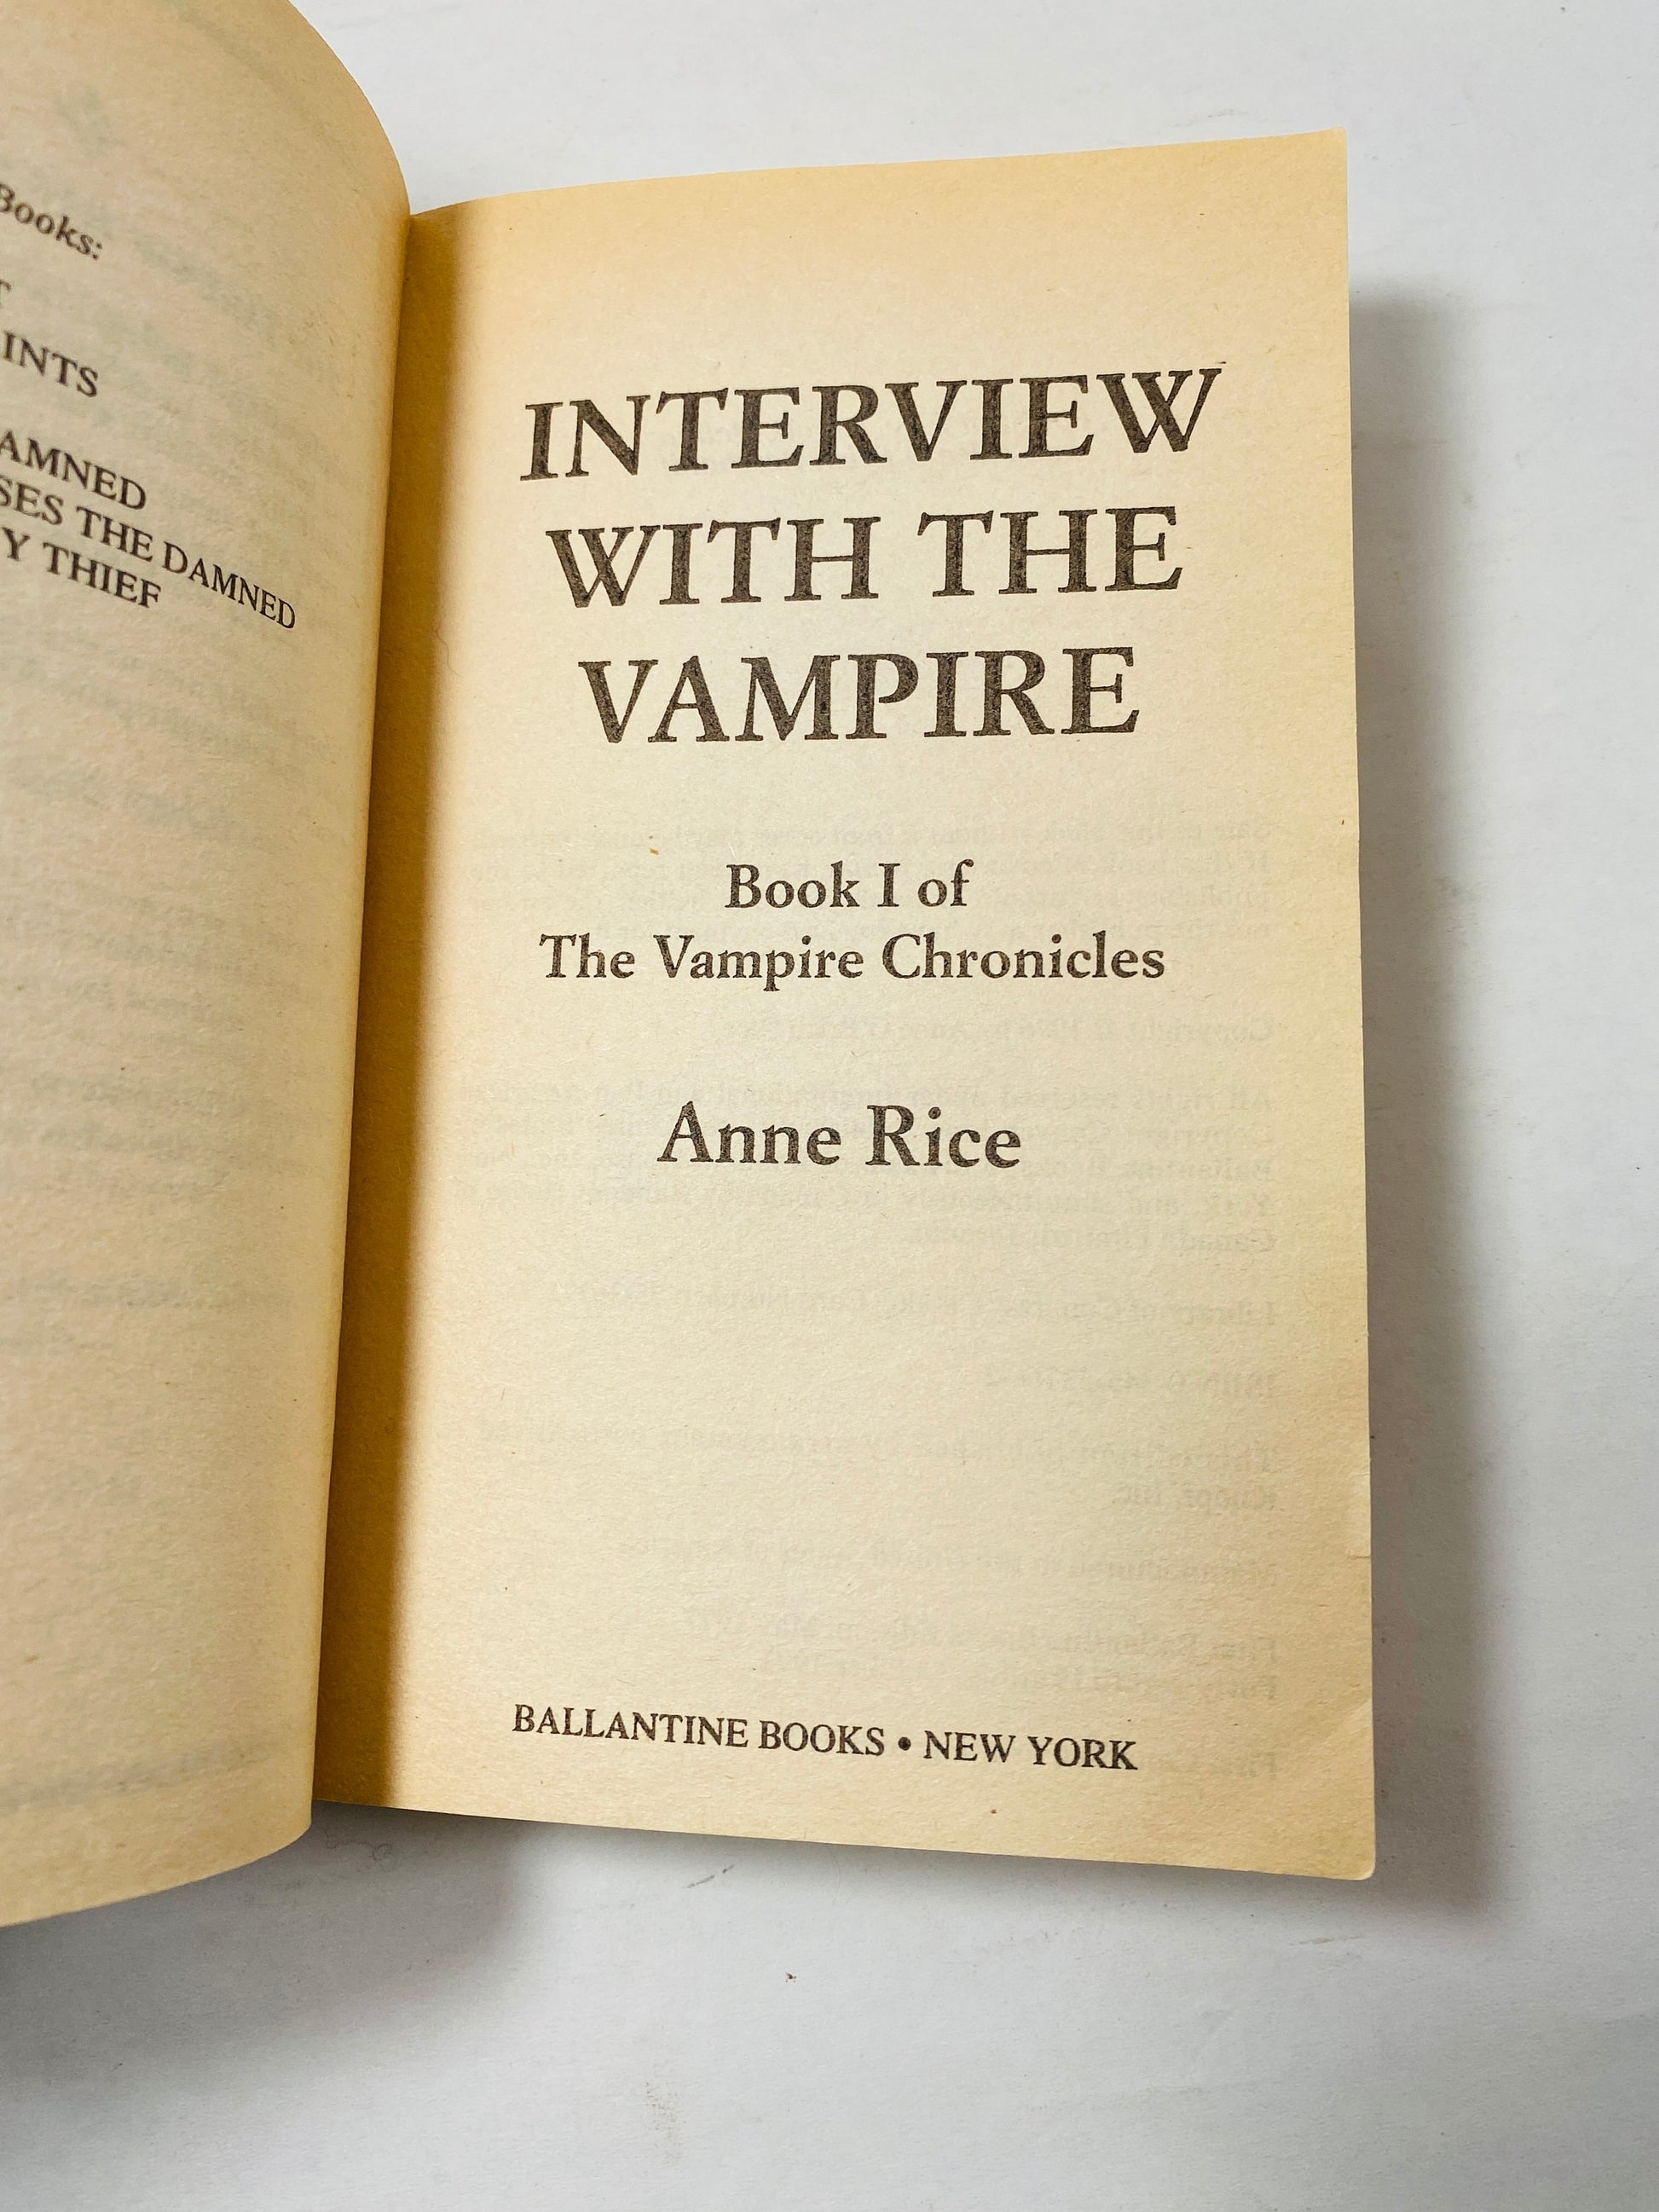 Interview with a Vampire by Anne Rice Early Printing vintage paperback circa 1993 Historical horror. Collectible gift.